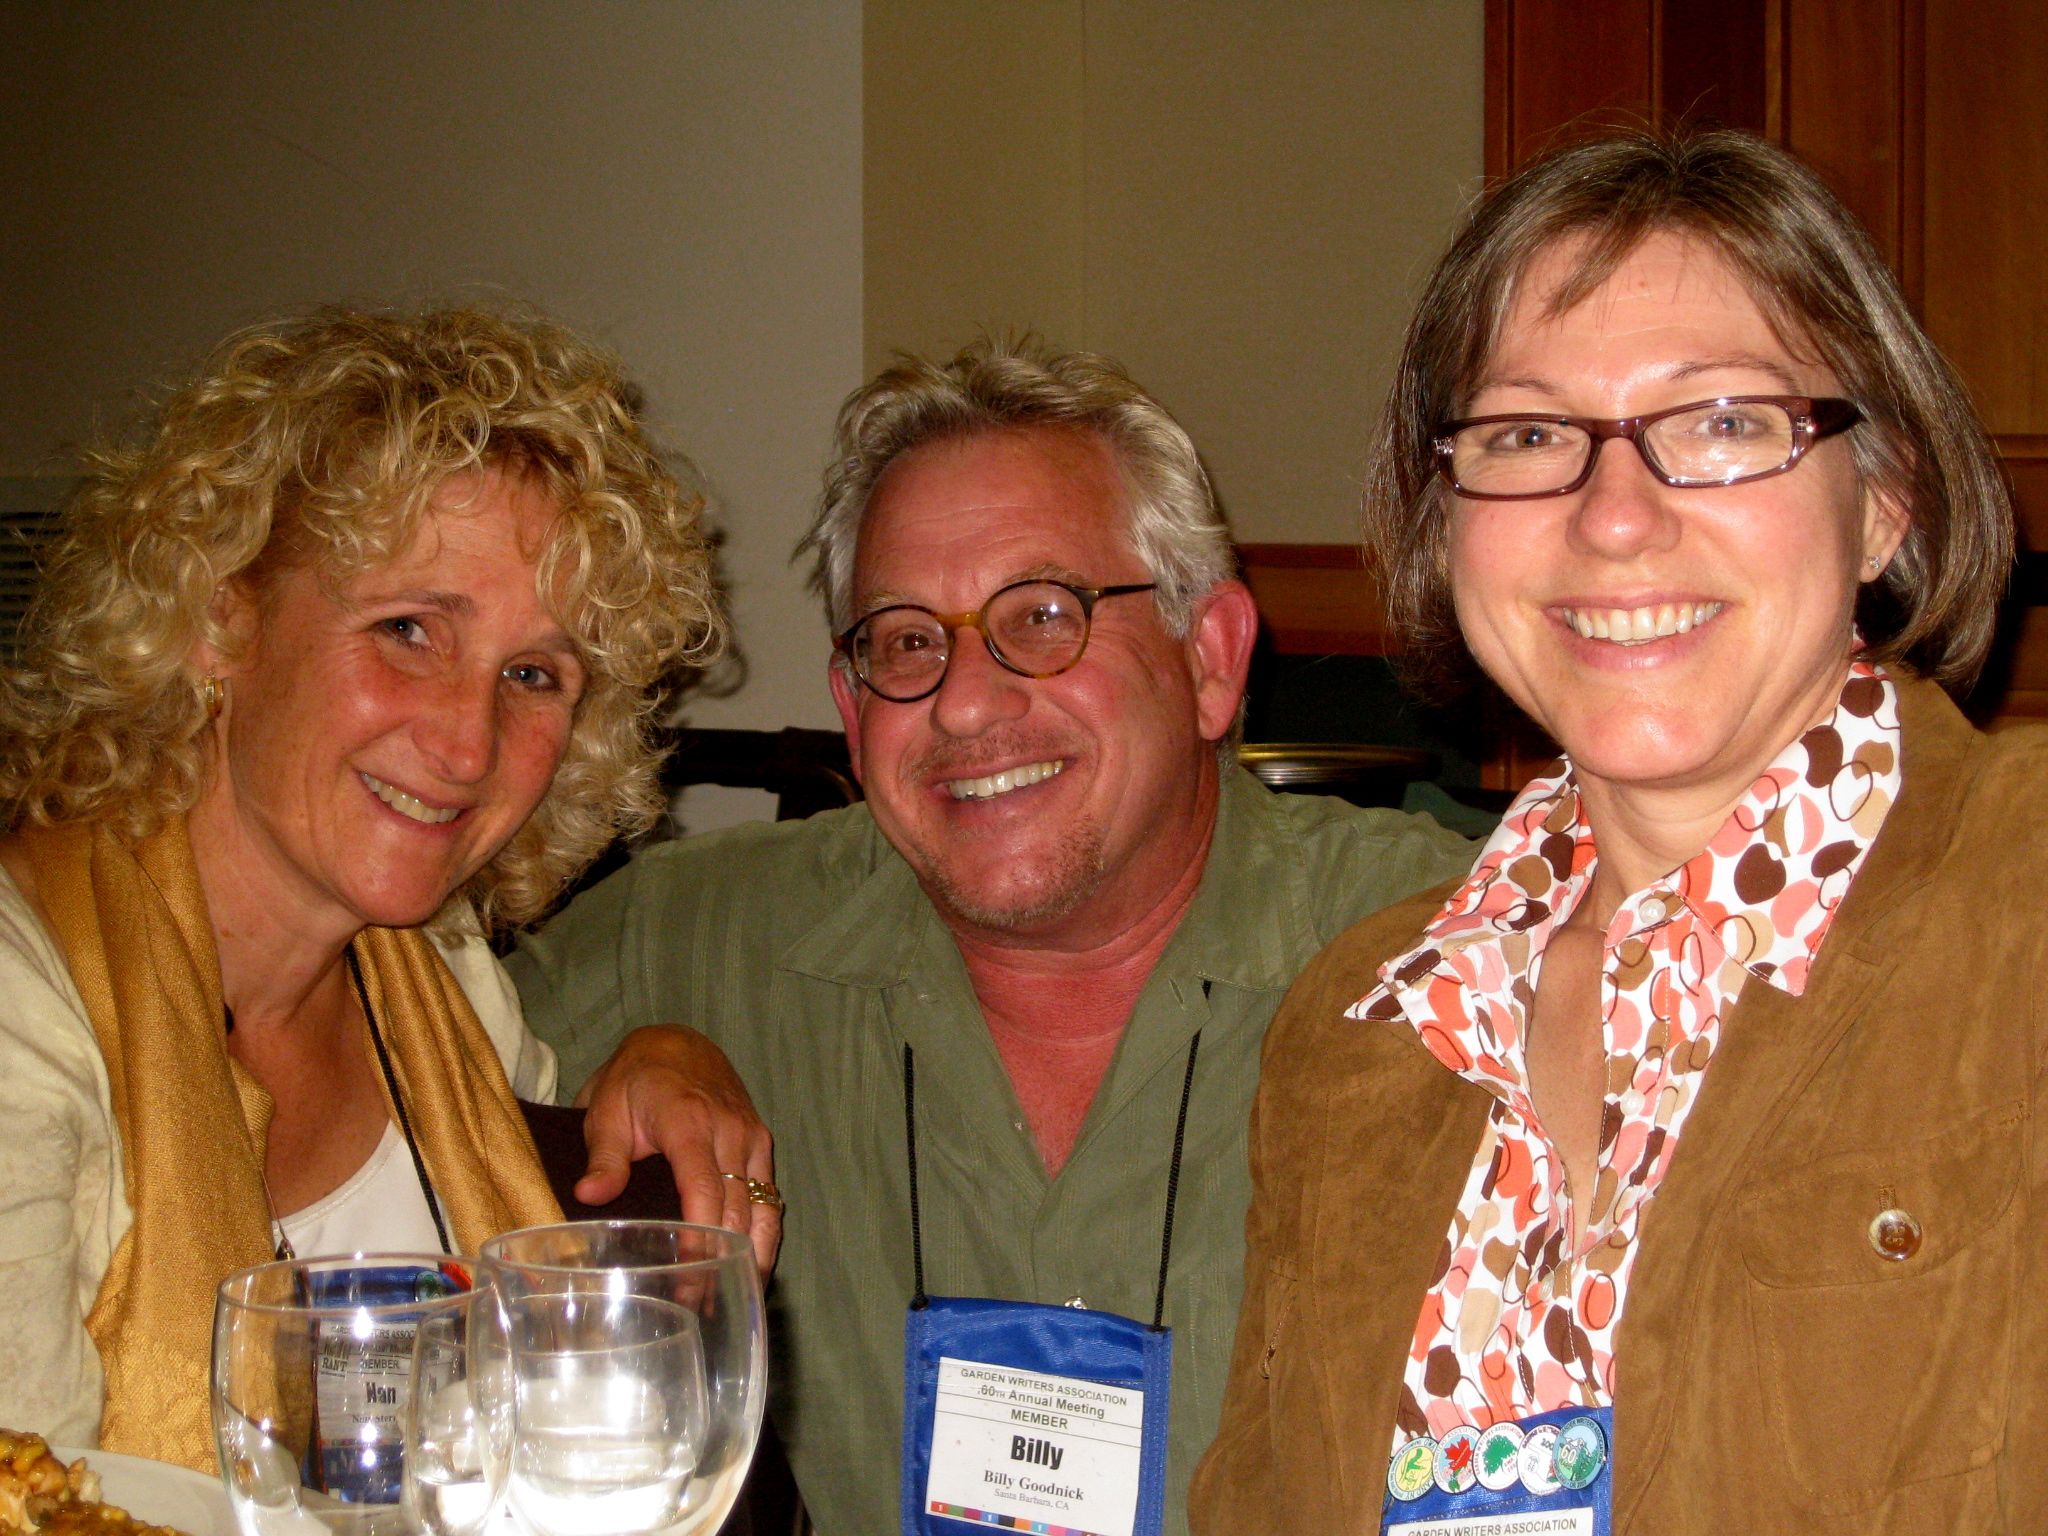 garden bloggers and writers, nan sterman, billy goodnick and Susan Apleget-Hurst